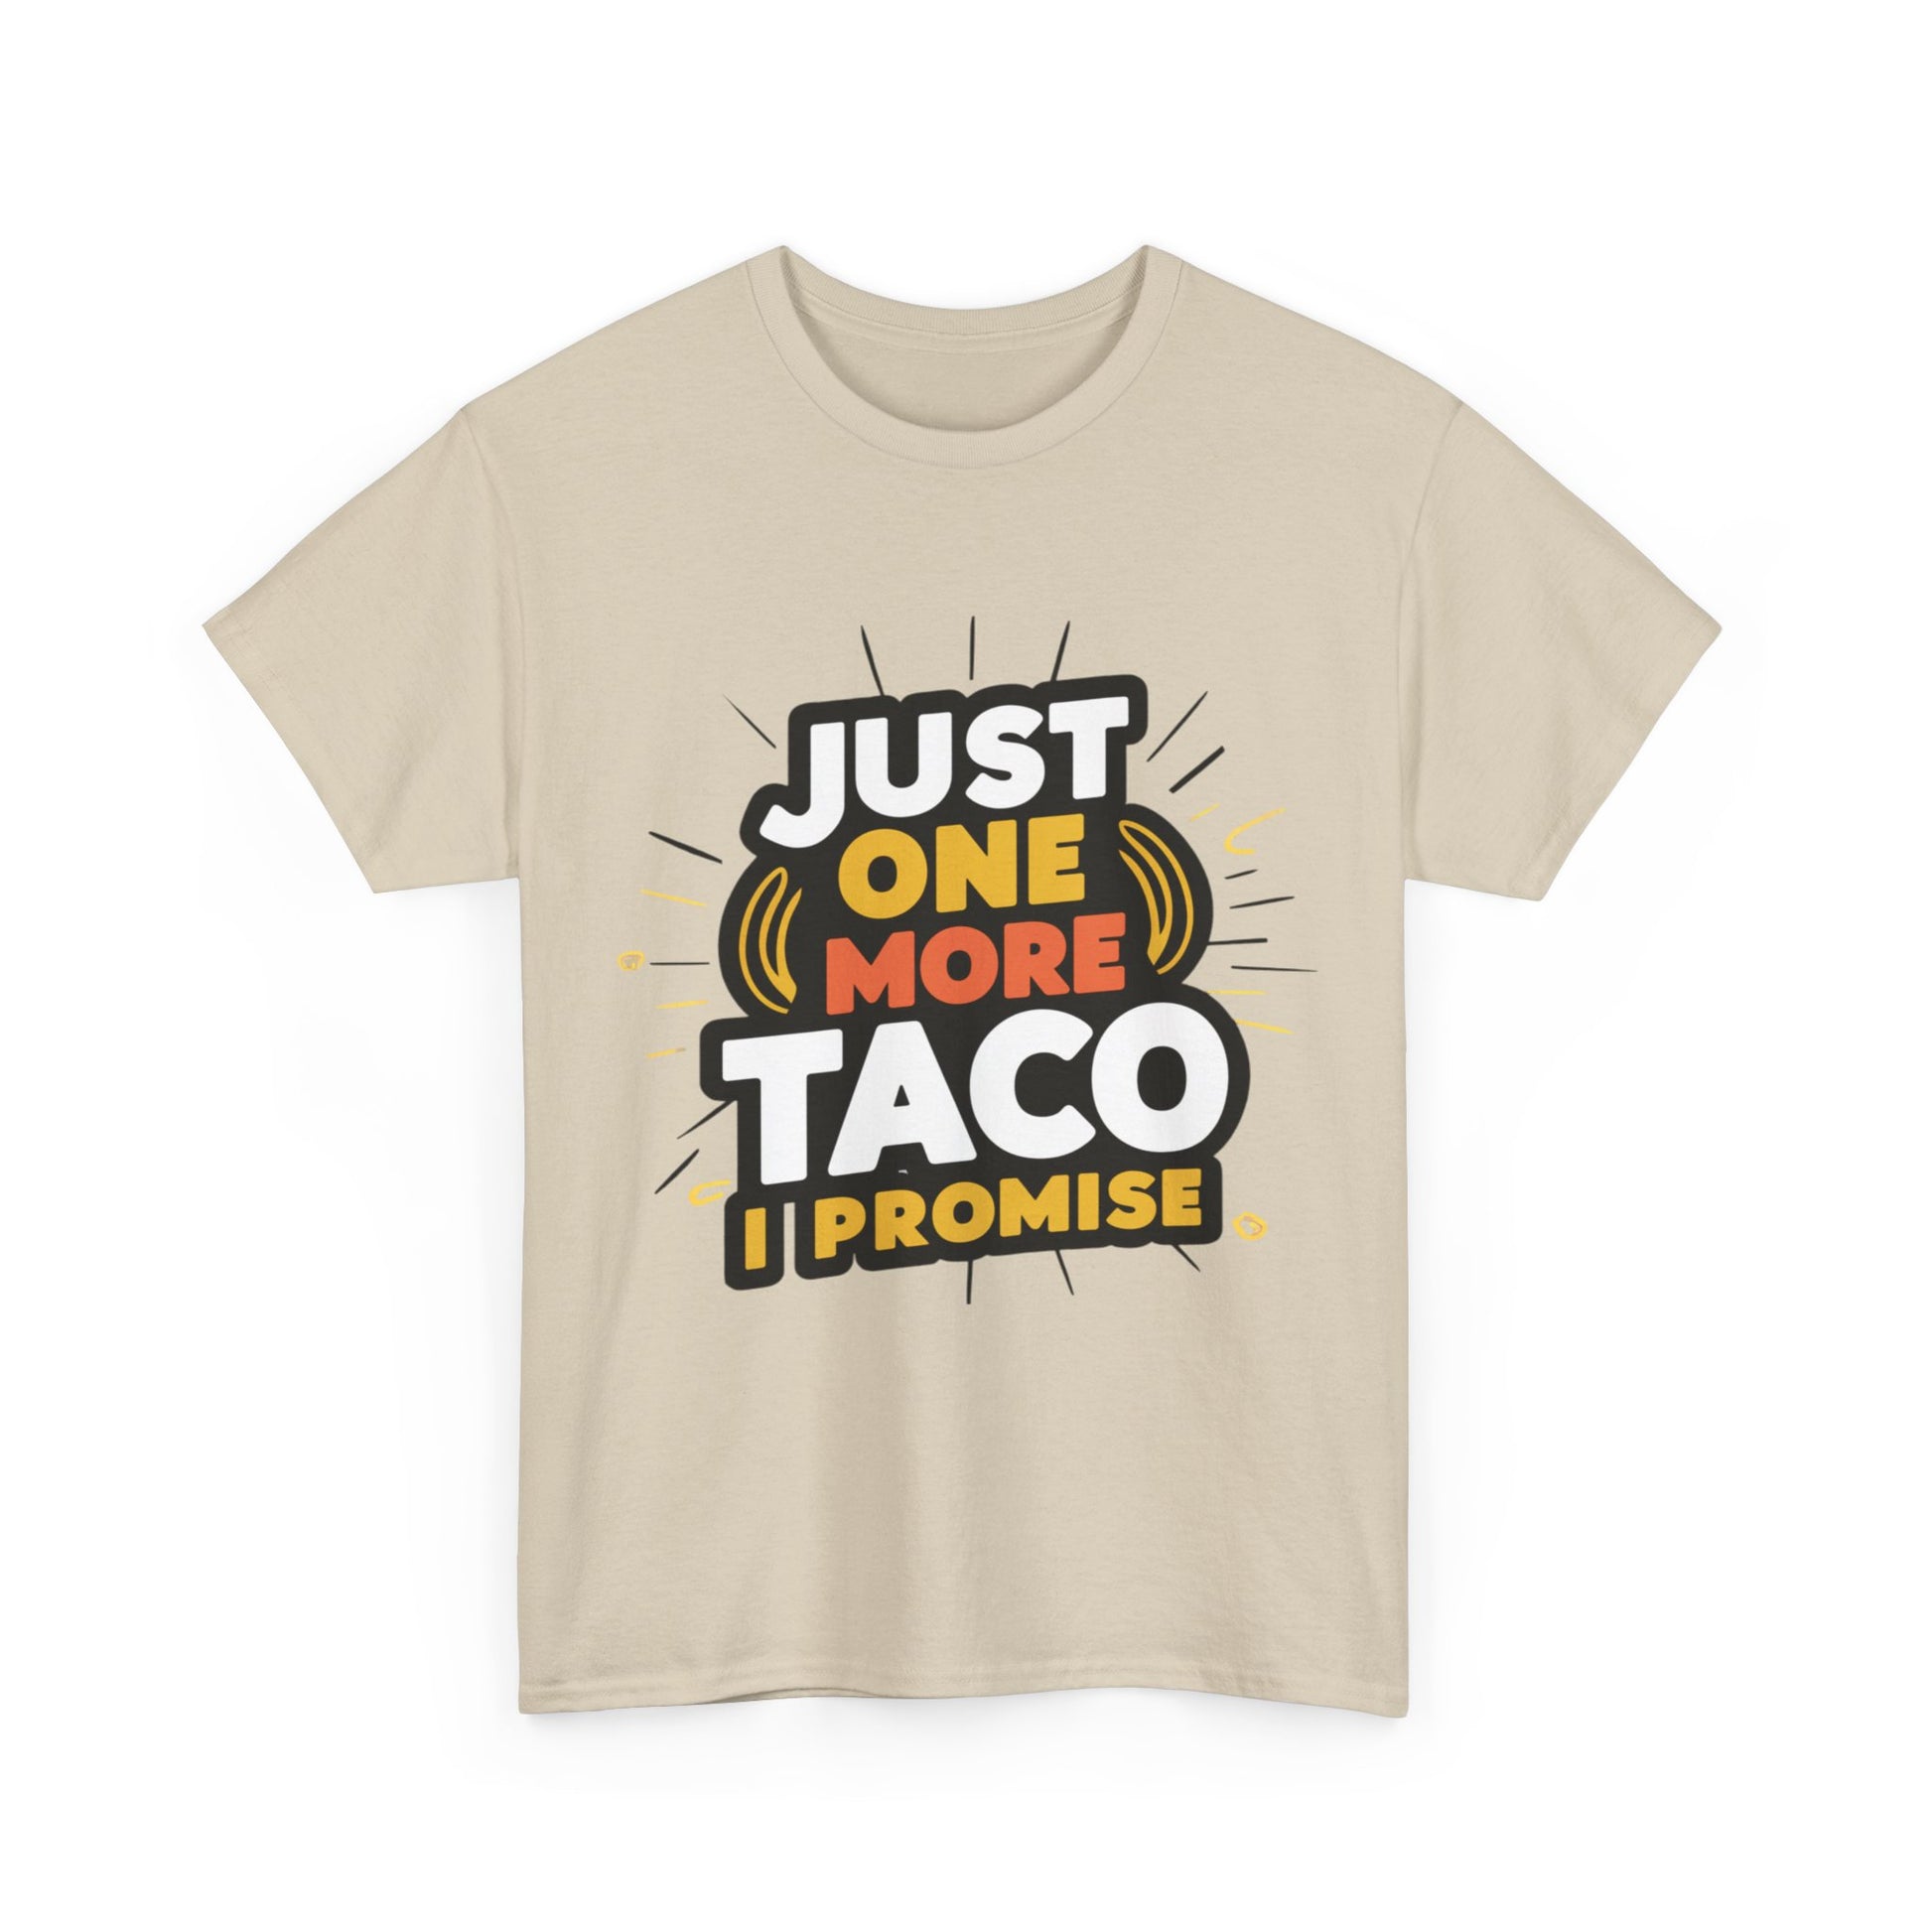 Just One More Taco I Promise Mexican Food Graphic Unisex Heavy Cotton Tee Cotton Funny Humorous Graphic Soft Premium Unisex Men Women Sand T-shirt Birthday Gift-36